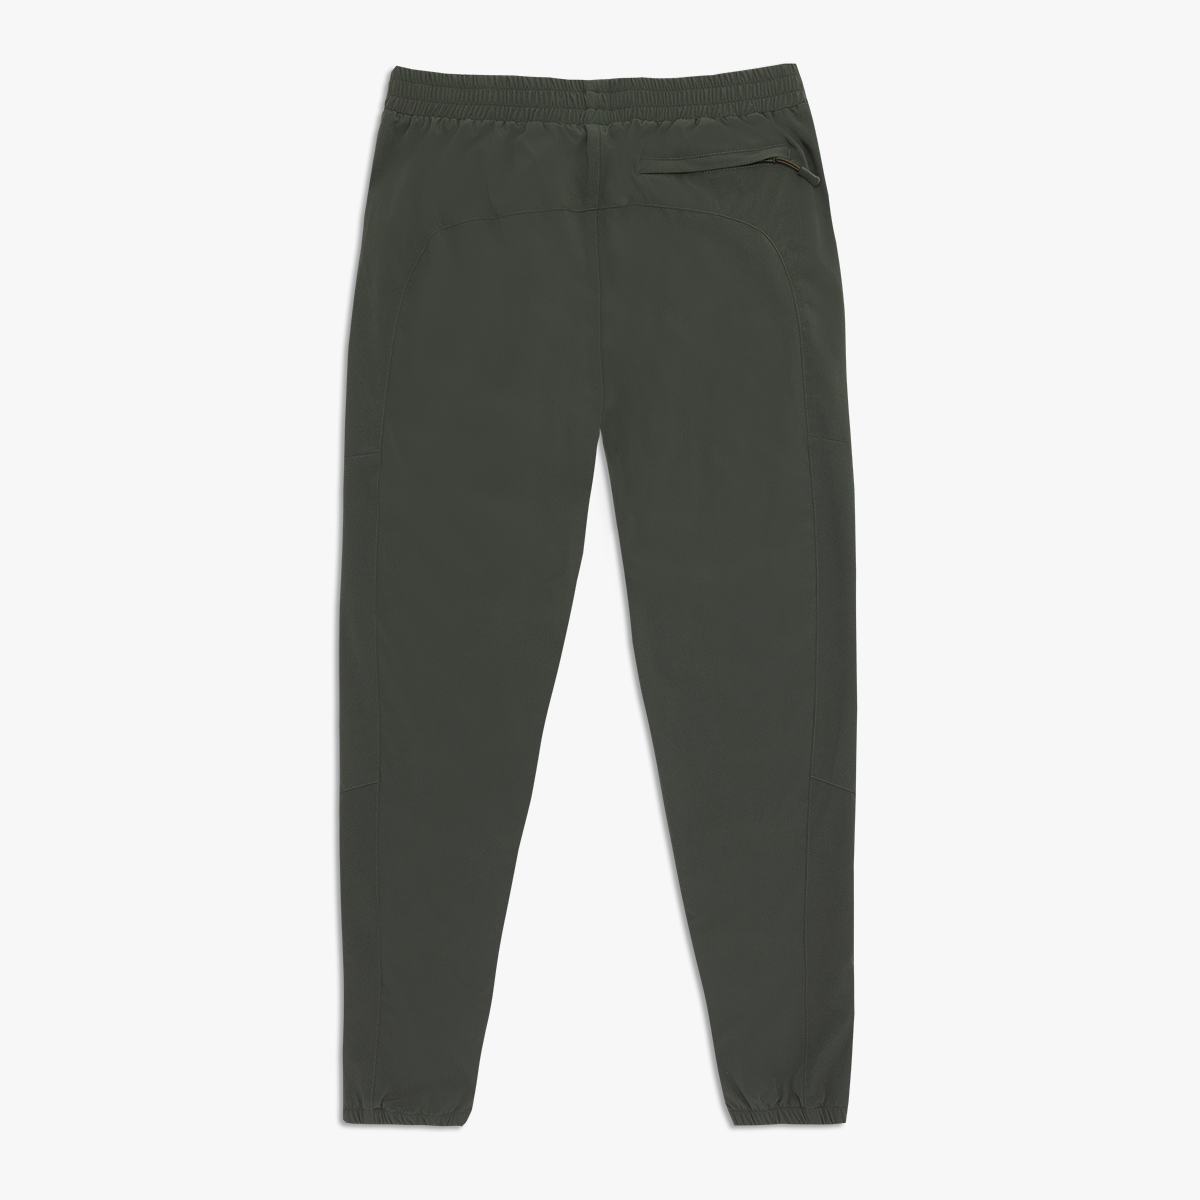 Routine Pennant Training Pant